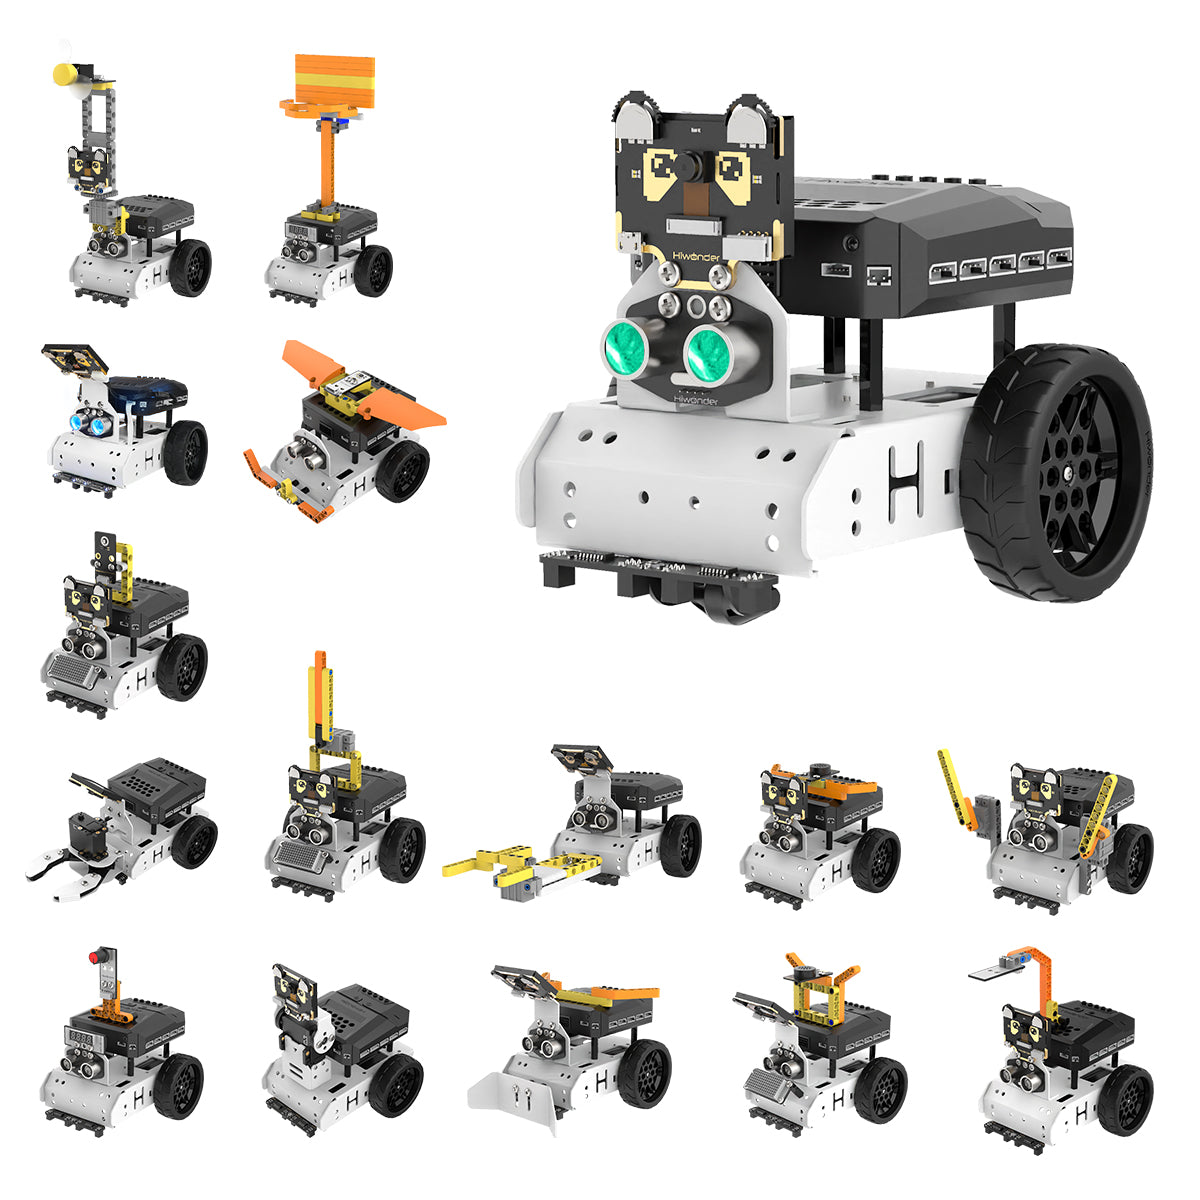 Hiwonder AiNova Pro 16-in-1 Programmable Building Robotic Kit Toys Support Scratch & Python for Kids Ages 12+